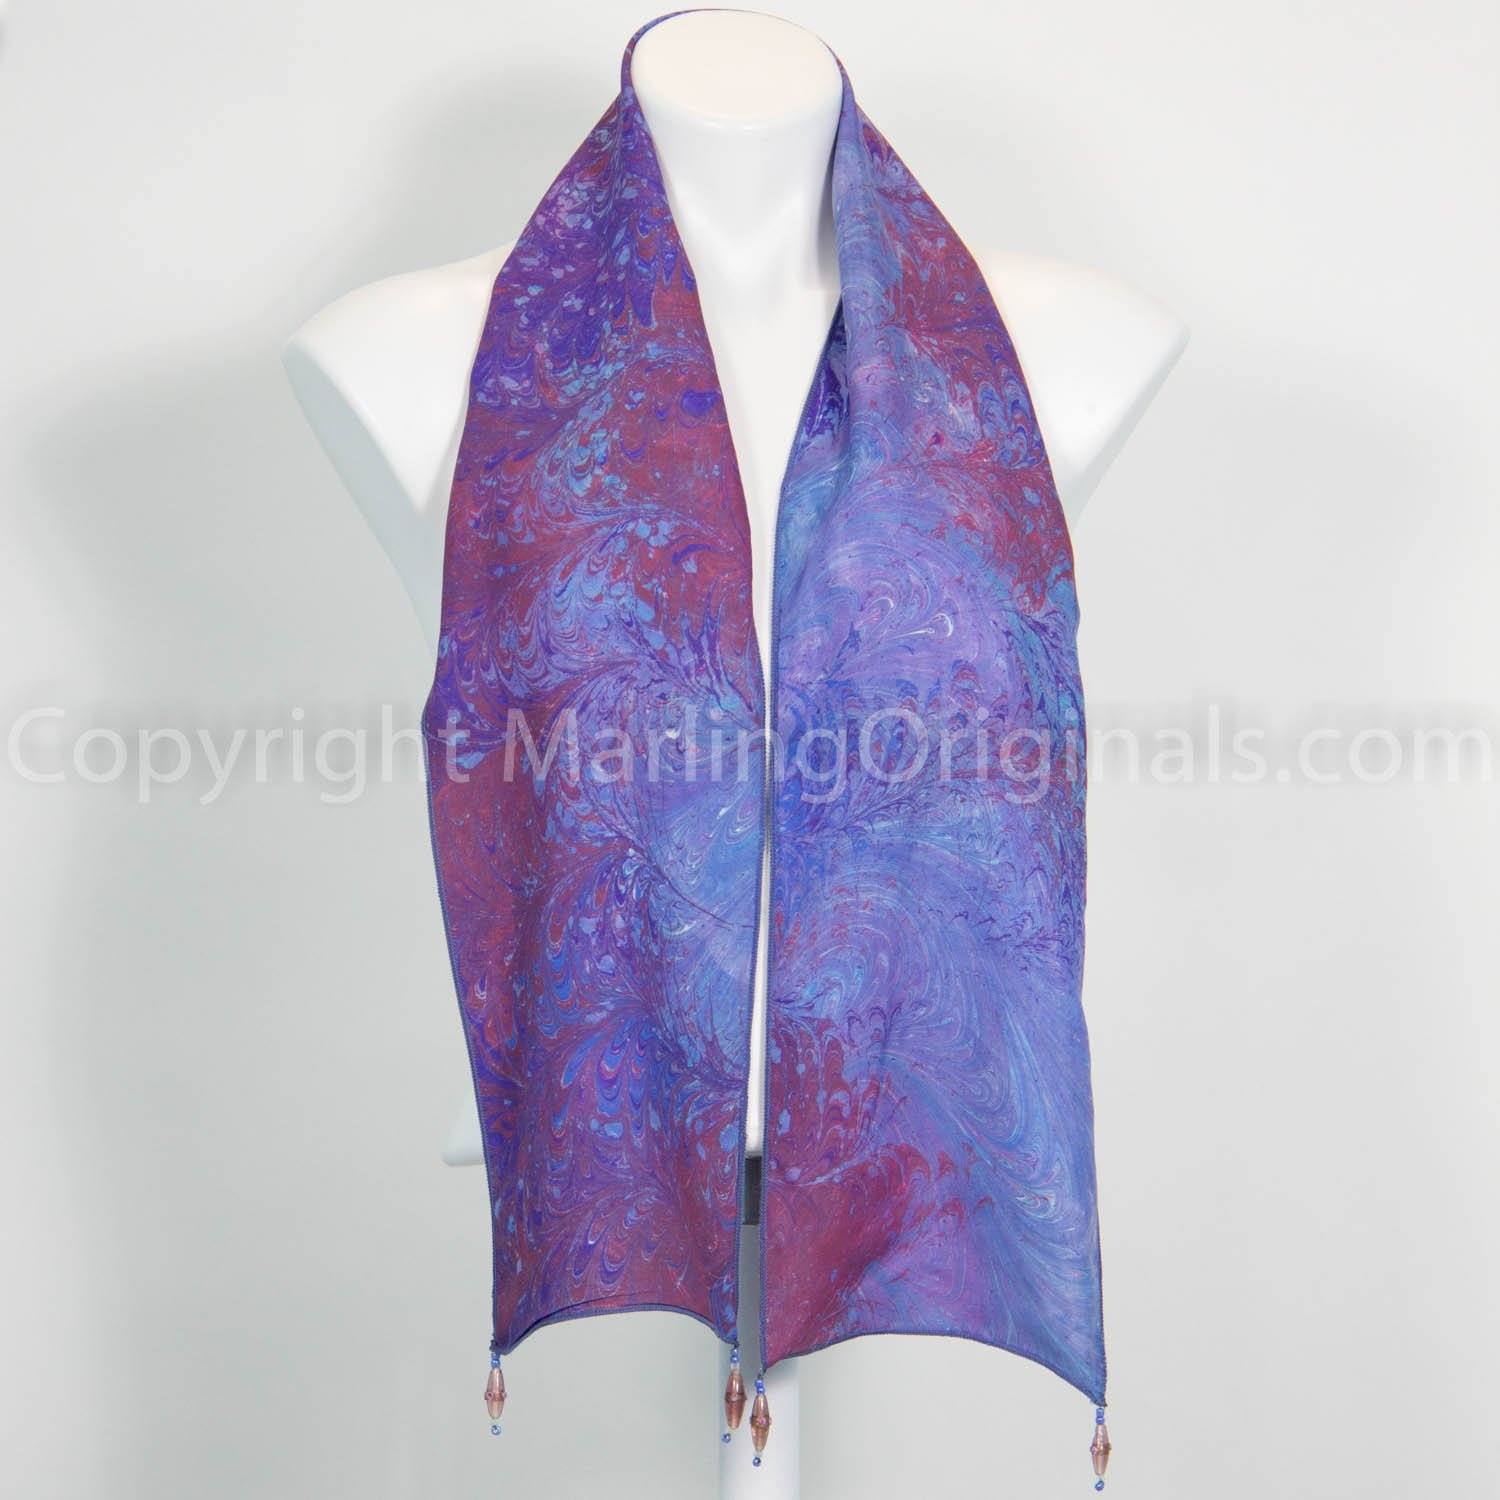 silk scarf marbled in blue and red.  Blue scarf has bead dangles at each corner